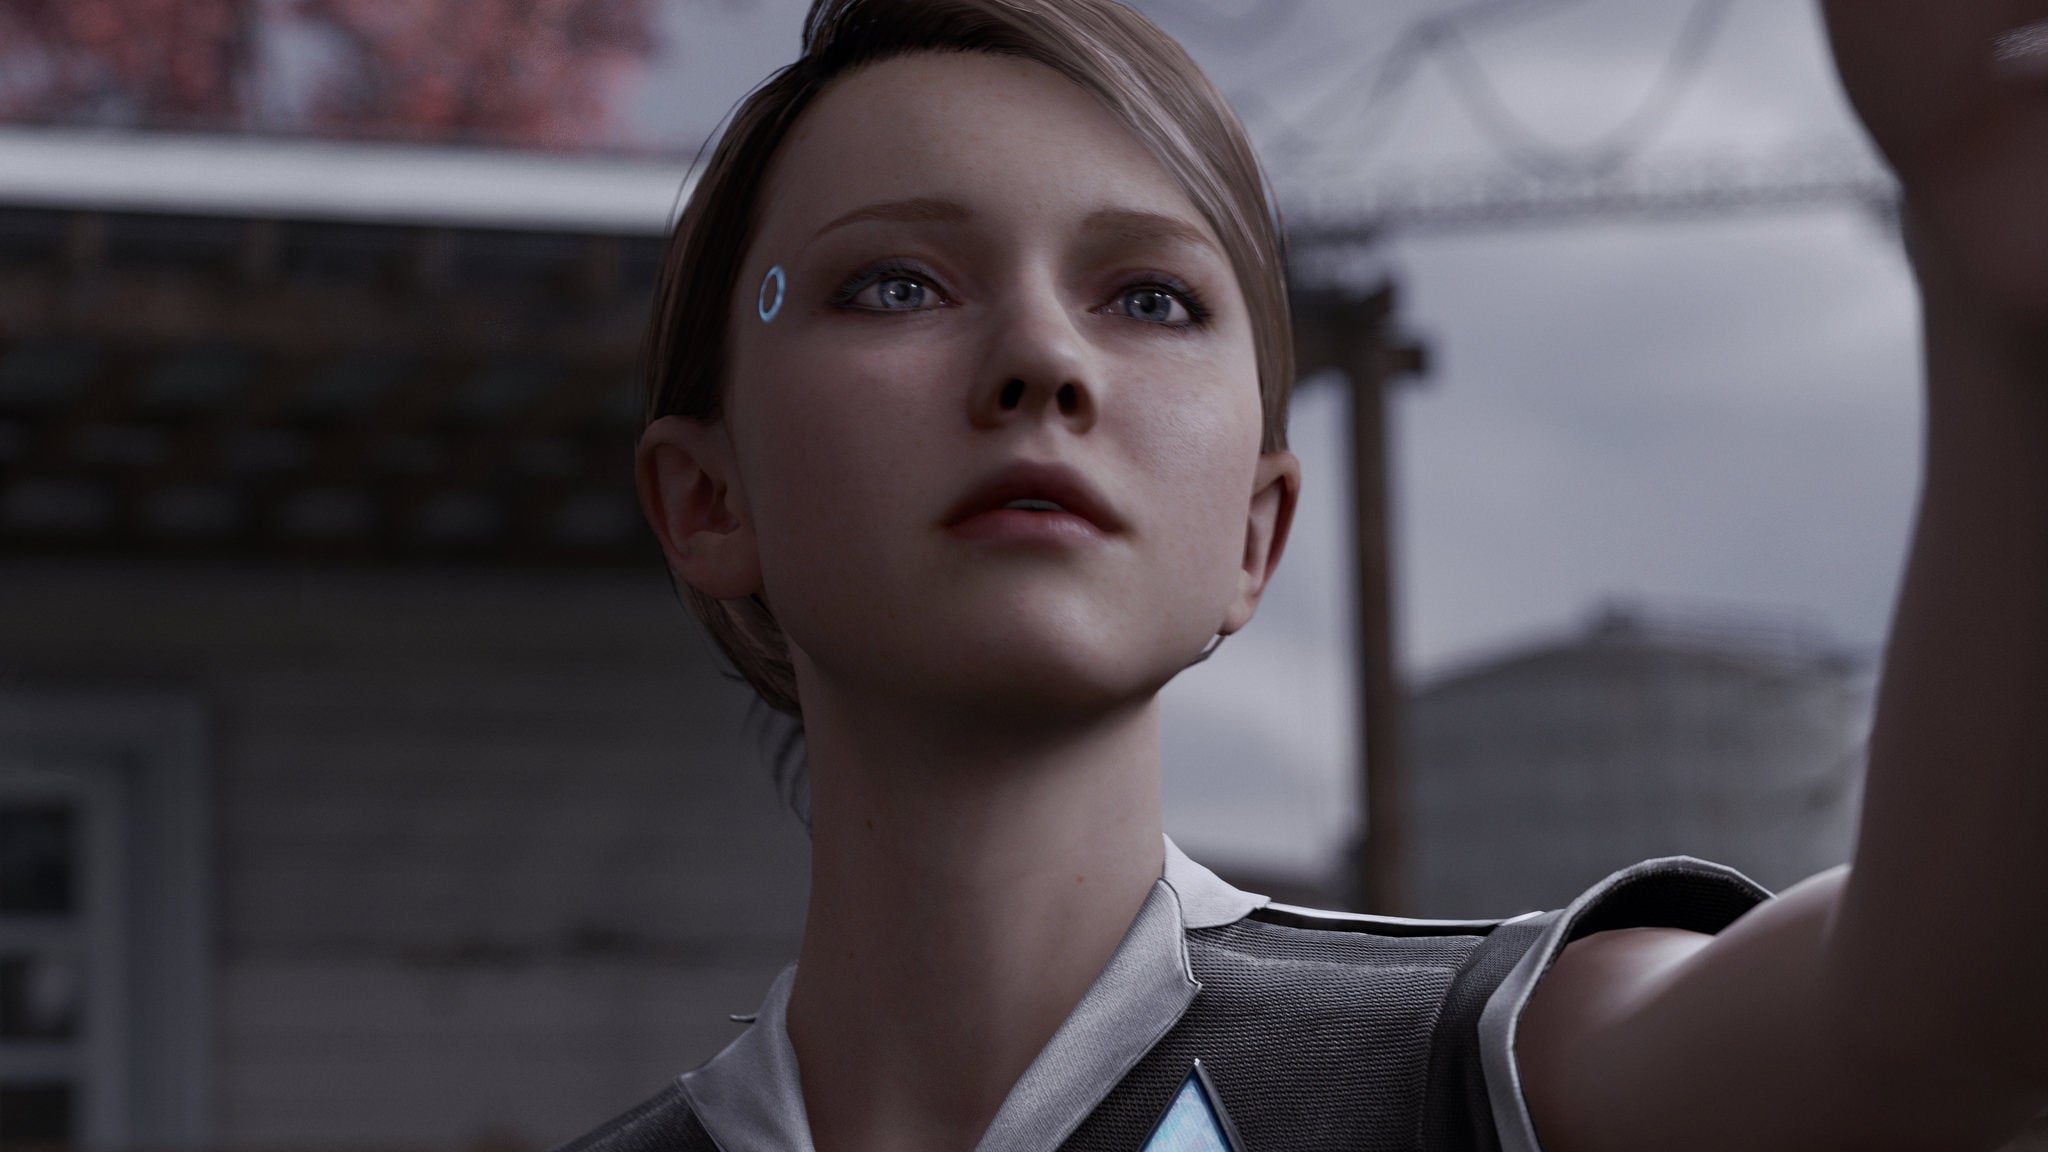 Image for UK MPs and campaigners hit out at representations of child abuse in Detroit: Become Human